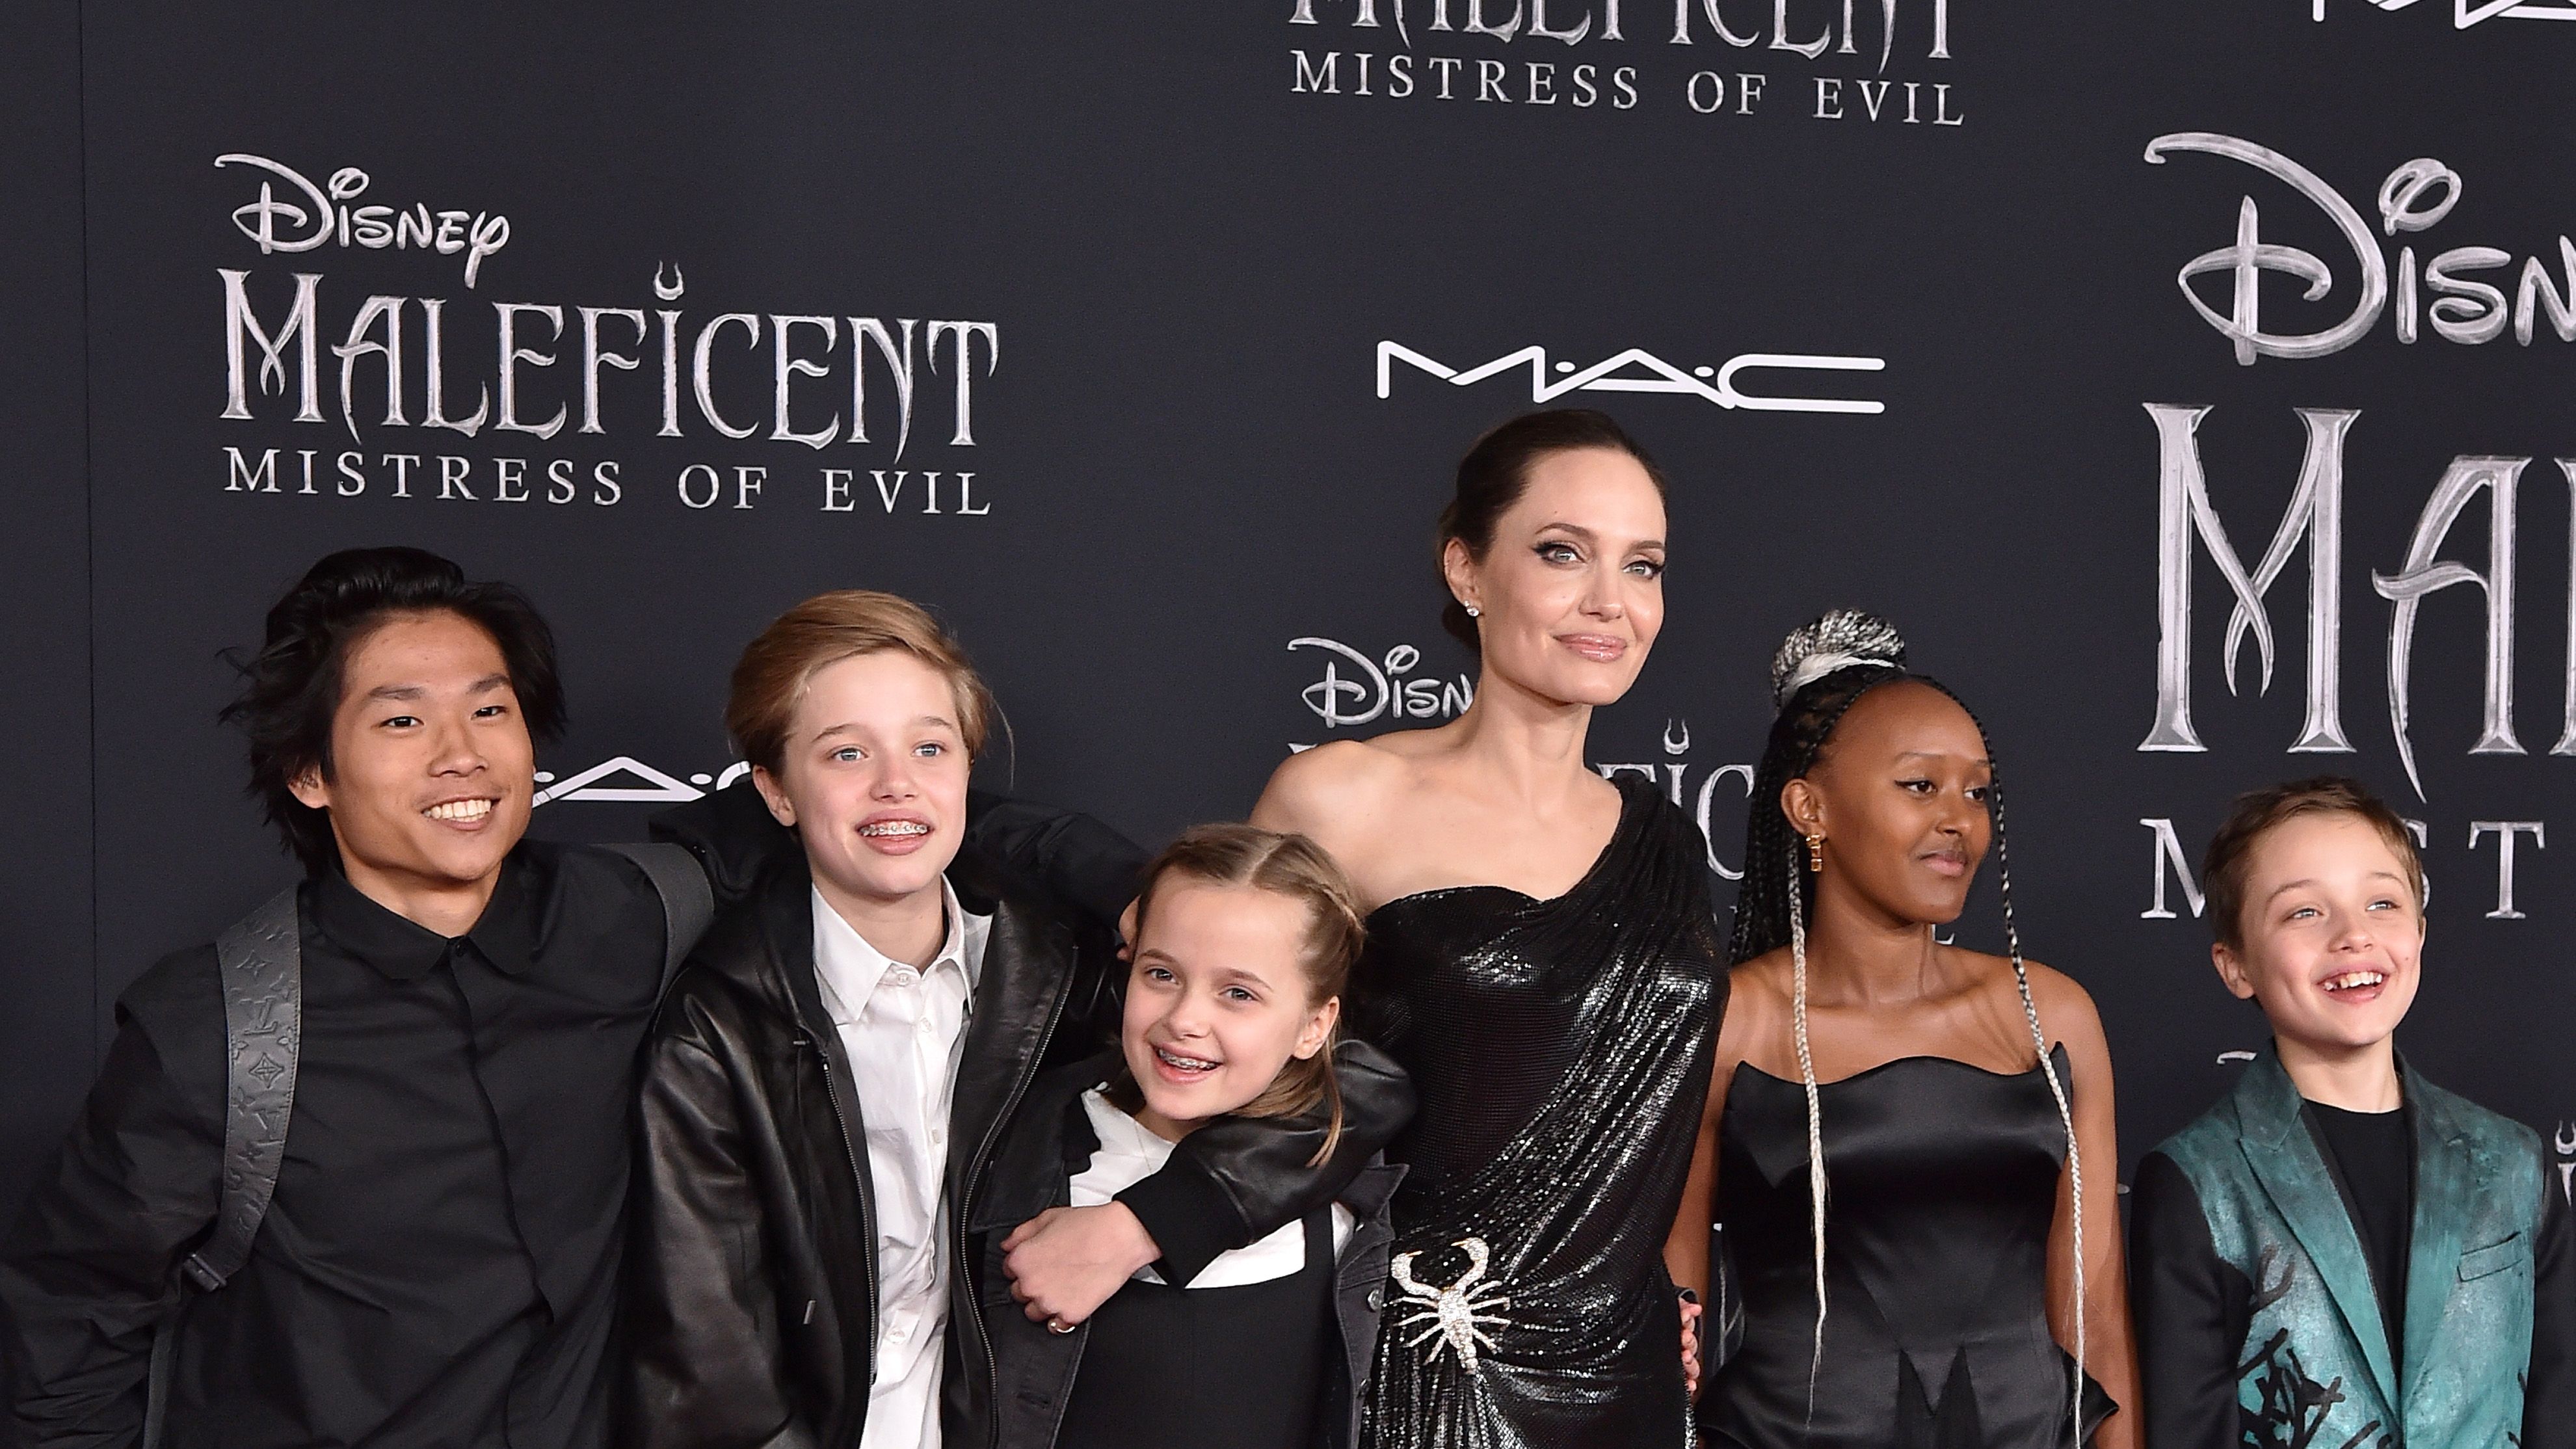 Angelina Jolie's Meddling is Getting in the Way of Son Pax's New